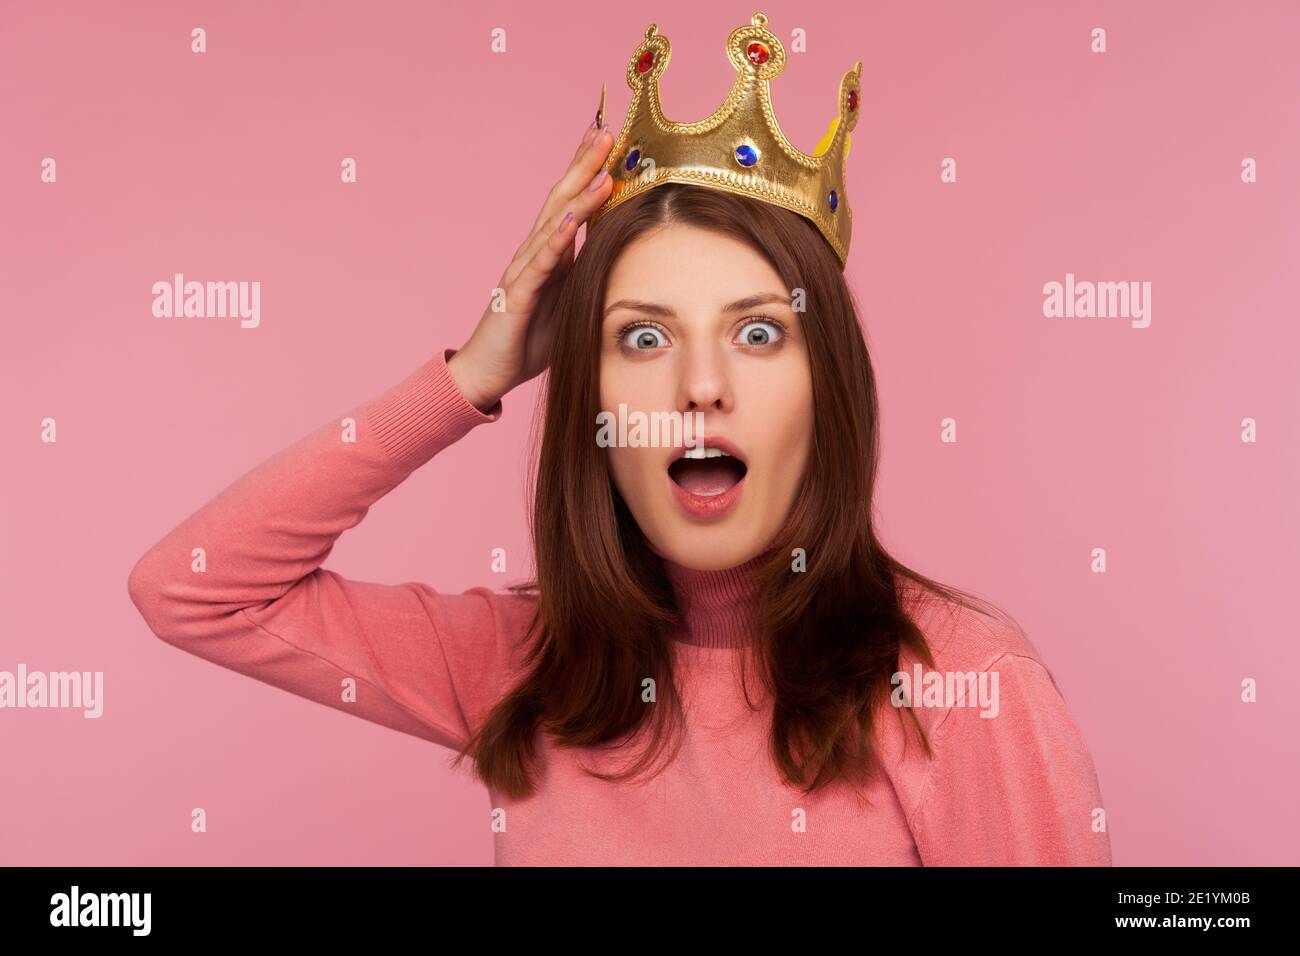 Closeup shocked bossy woman with brown hair in pink sweater adjusting golden crown on head looking at camera with big eyes and open mouth. Indoor stud Stock Photo